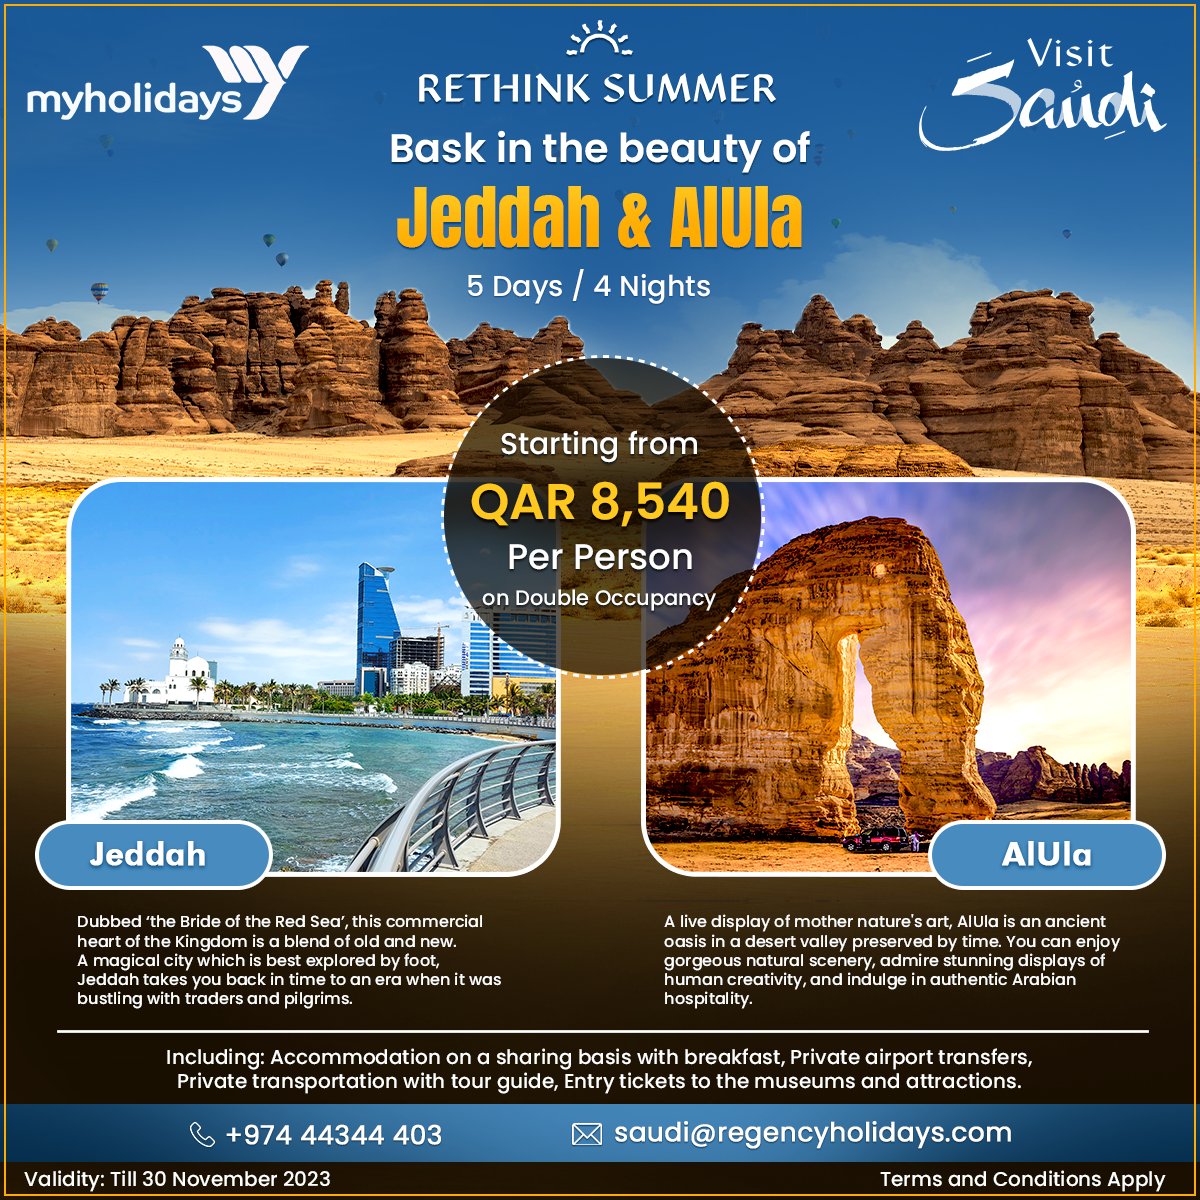 Our 5 days 4 nights Jeddah & AlUla tour package is an incredible opportunity to step into the Arabic oasis and witness how these two historic cities capture the beauty of the past through its heritage sites.  Please contact us for more info.
#Jeddah #alulatourism #RethinkSummer